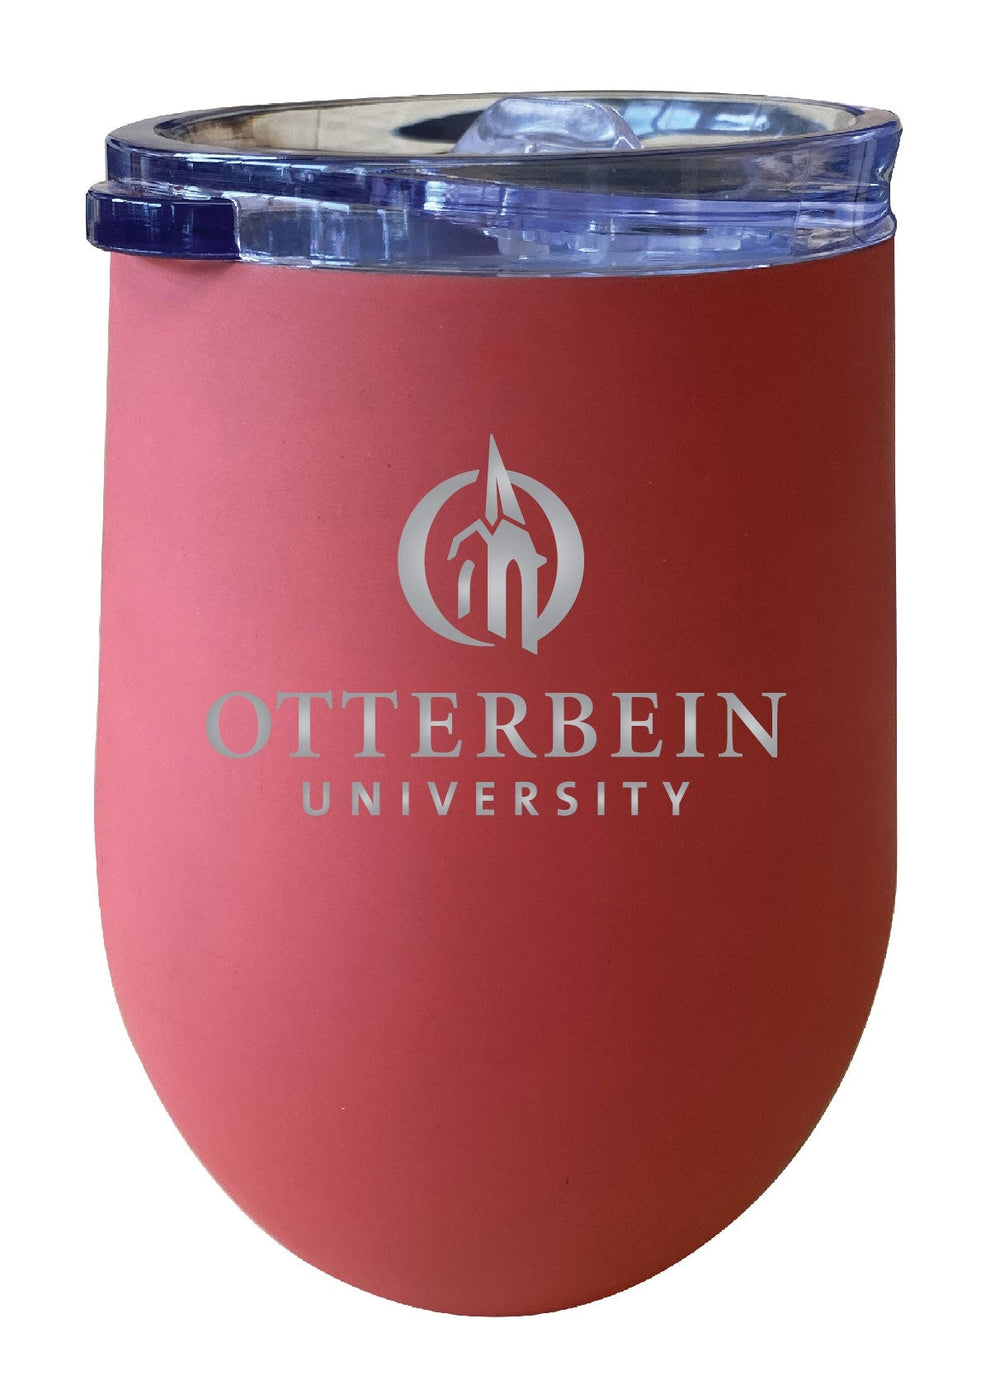 Otterbein University 12 oz Engraved Insulated Wine Stainless Steel Tumbler Officially Licensed Collegiate Product Image 2